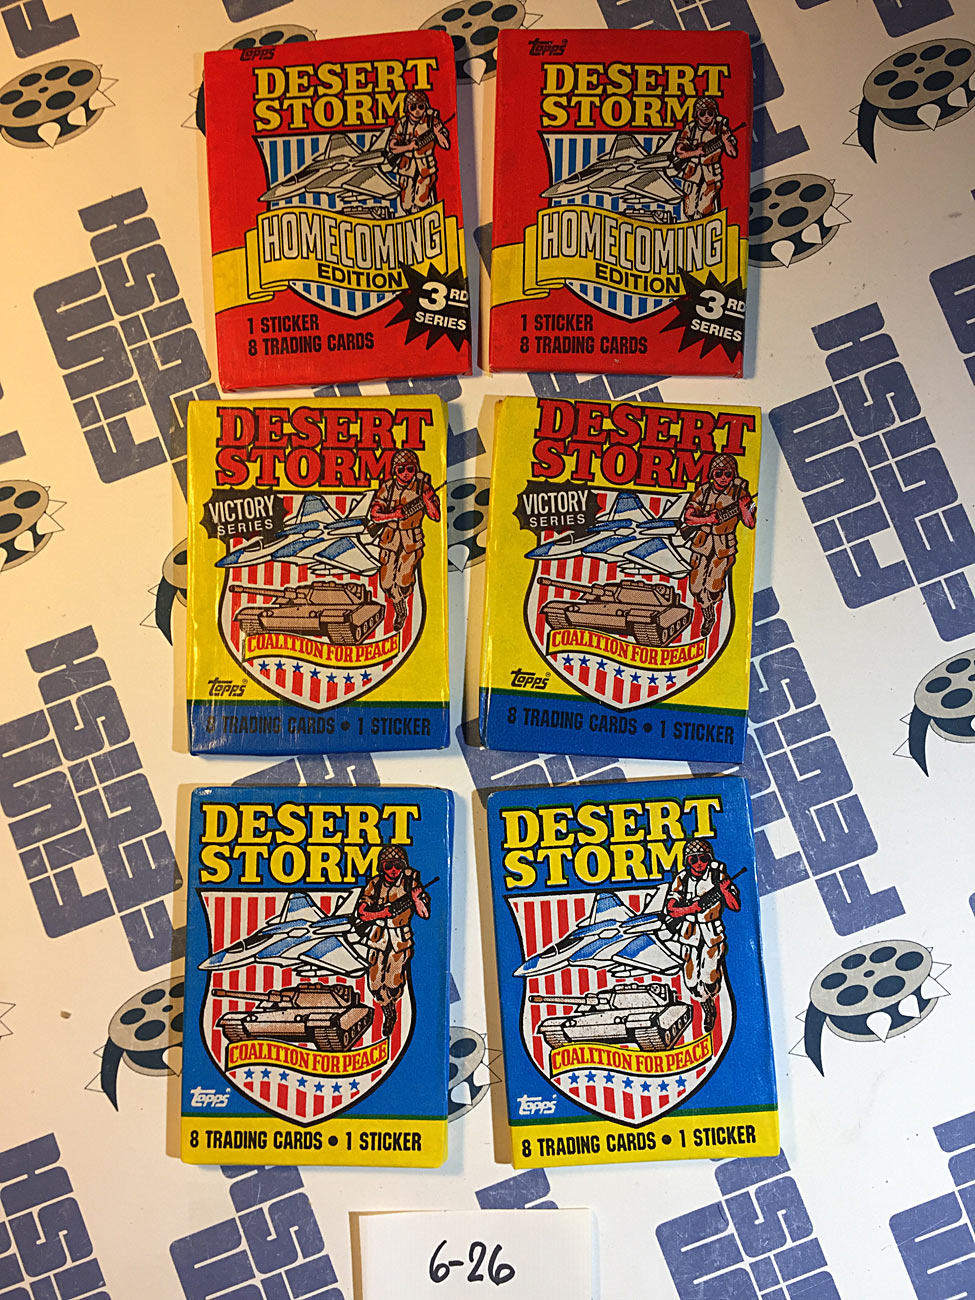 Set of 6 Sealed Topps Desert Storm Trading Card Wax Packs, Homecoming, Coalition For Peace, Victory Series [626]